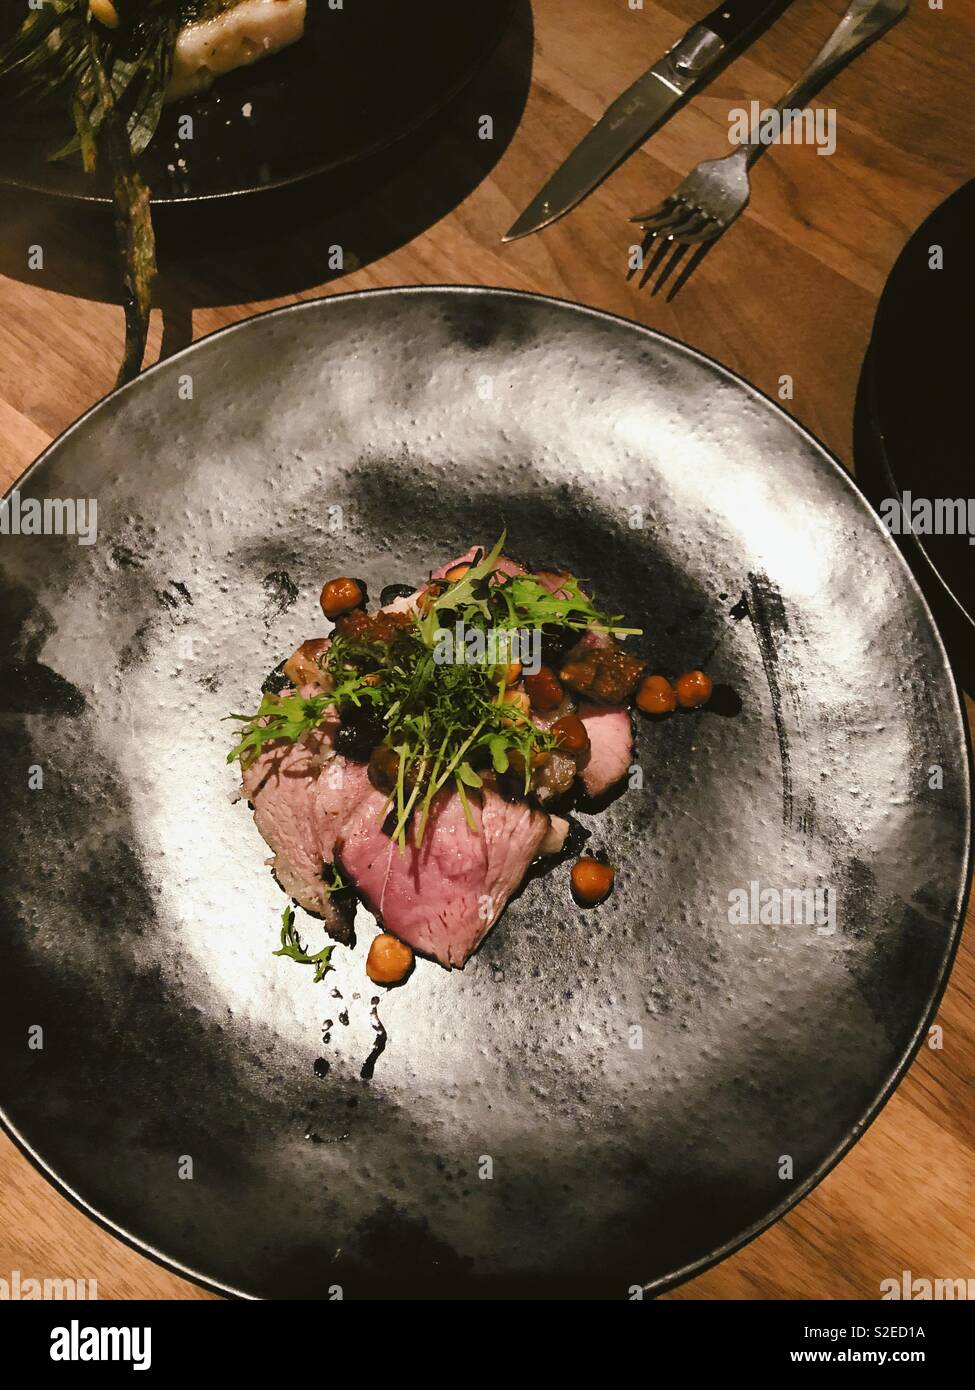 Roast lamb with hazelnuts and leaf garnish on black matte plate on wooden table Stock Photo